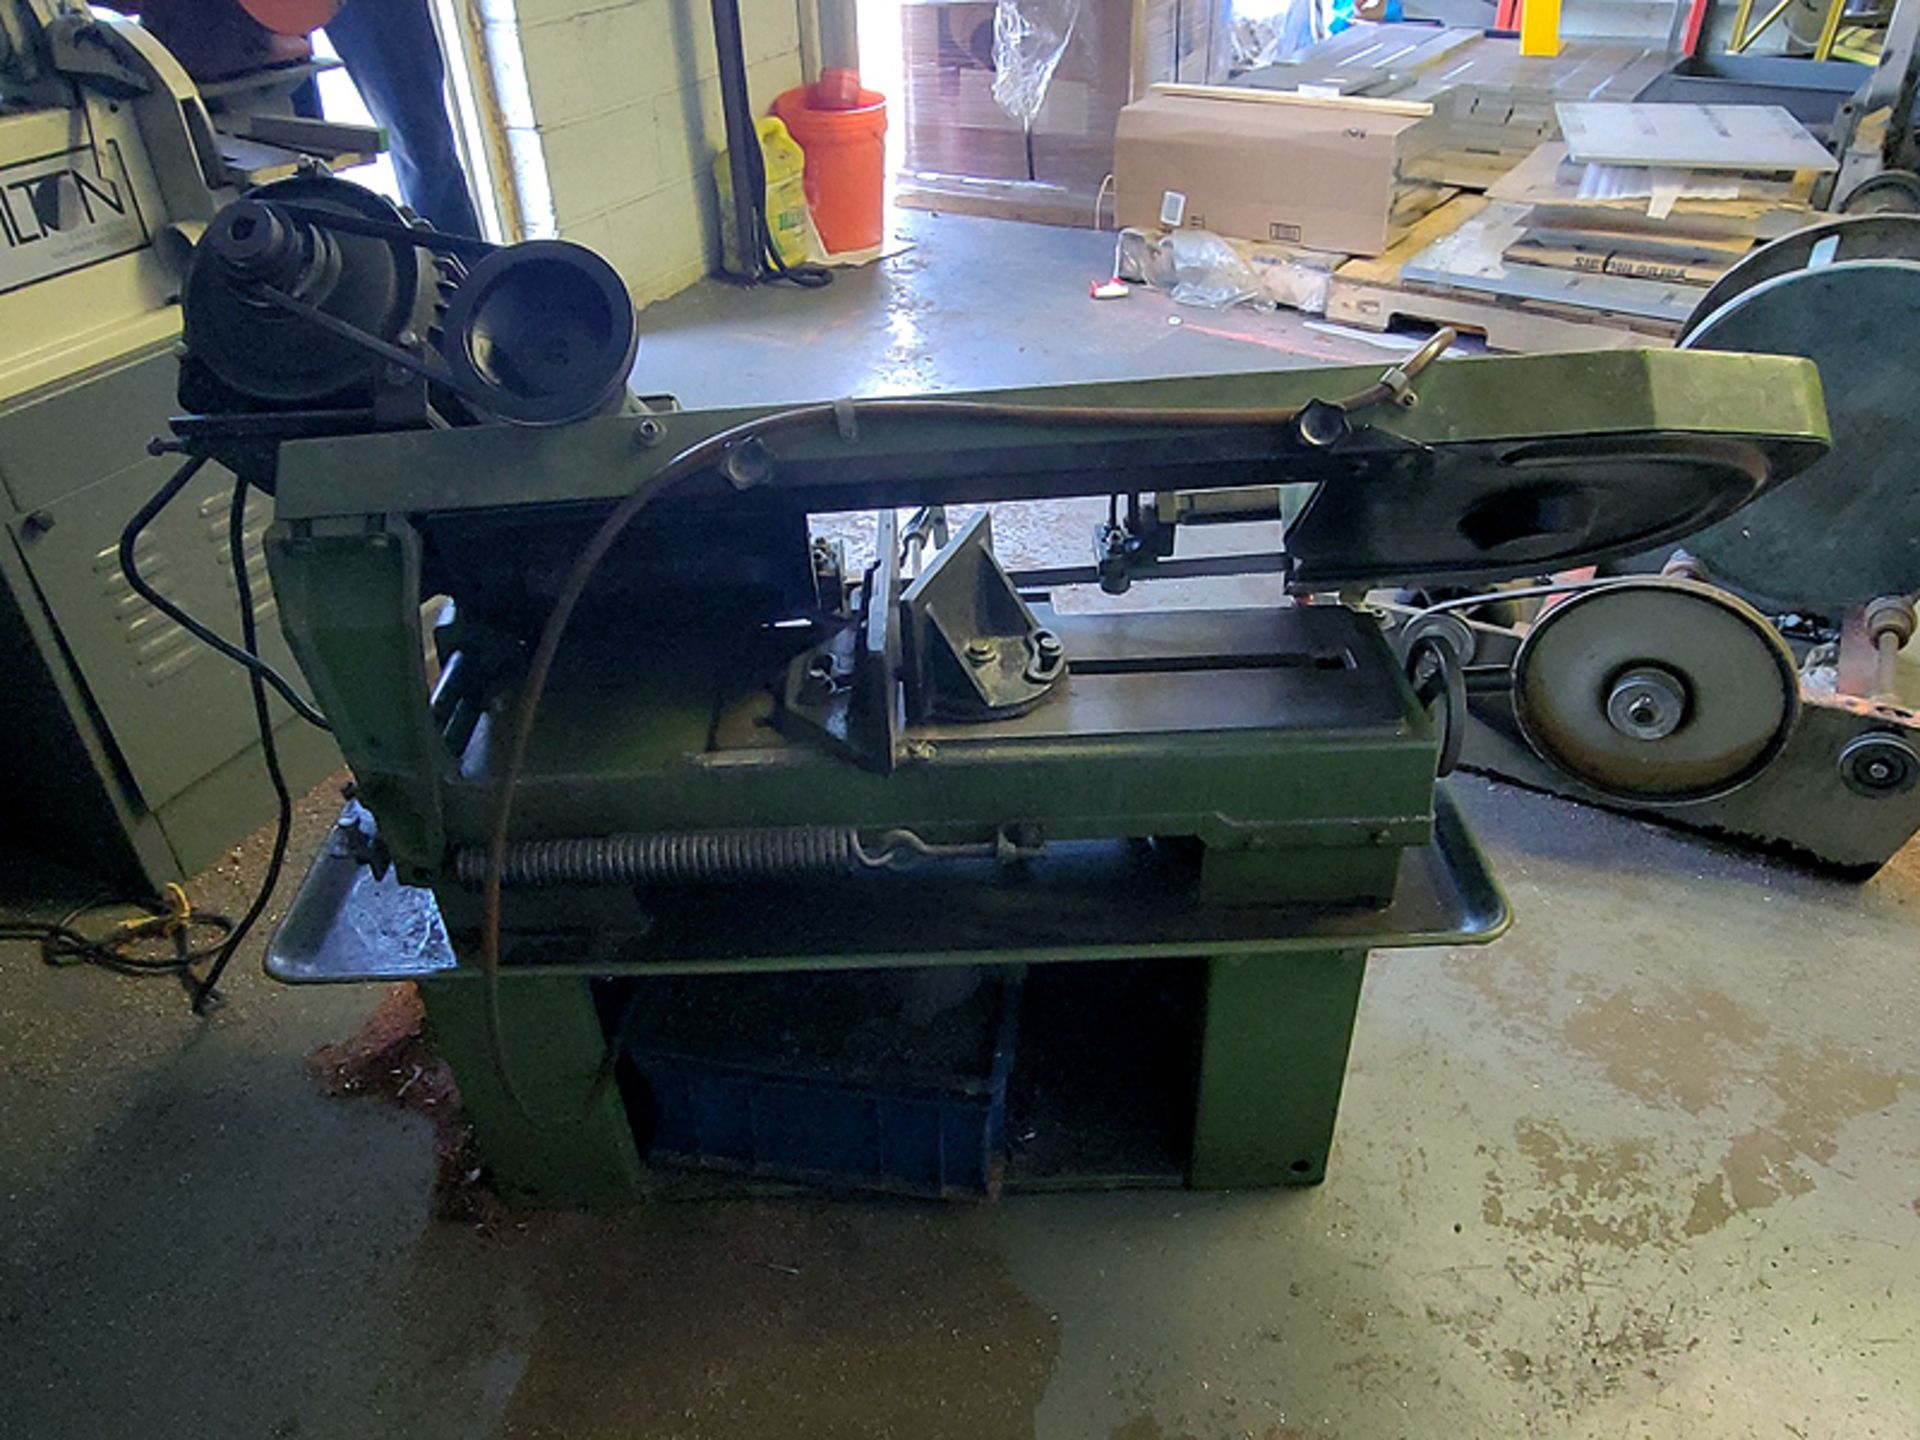 Rong Fu 7" Bandsaw Machine w/ Adjustable Pipe Stand - Image 5 of 12